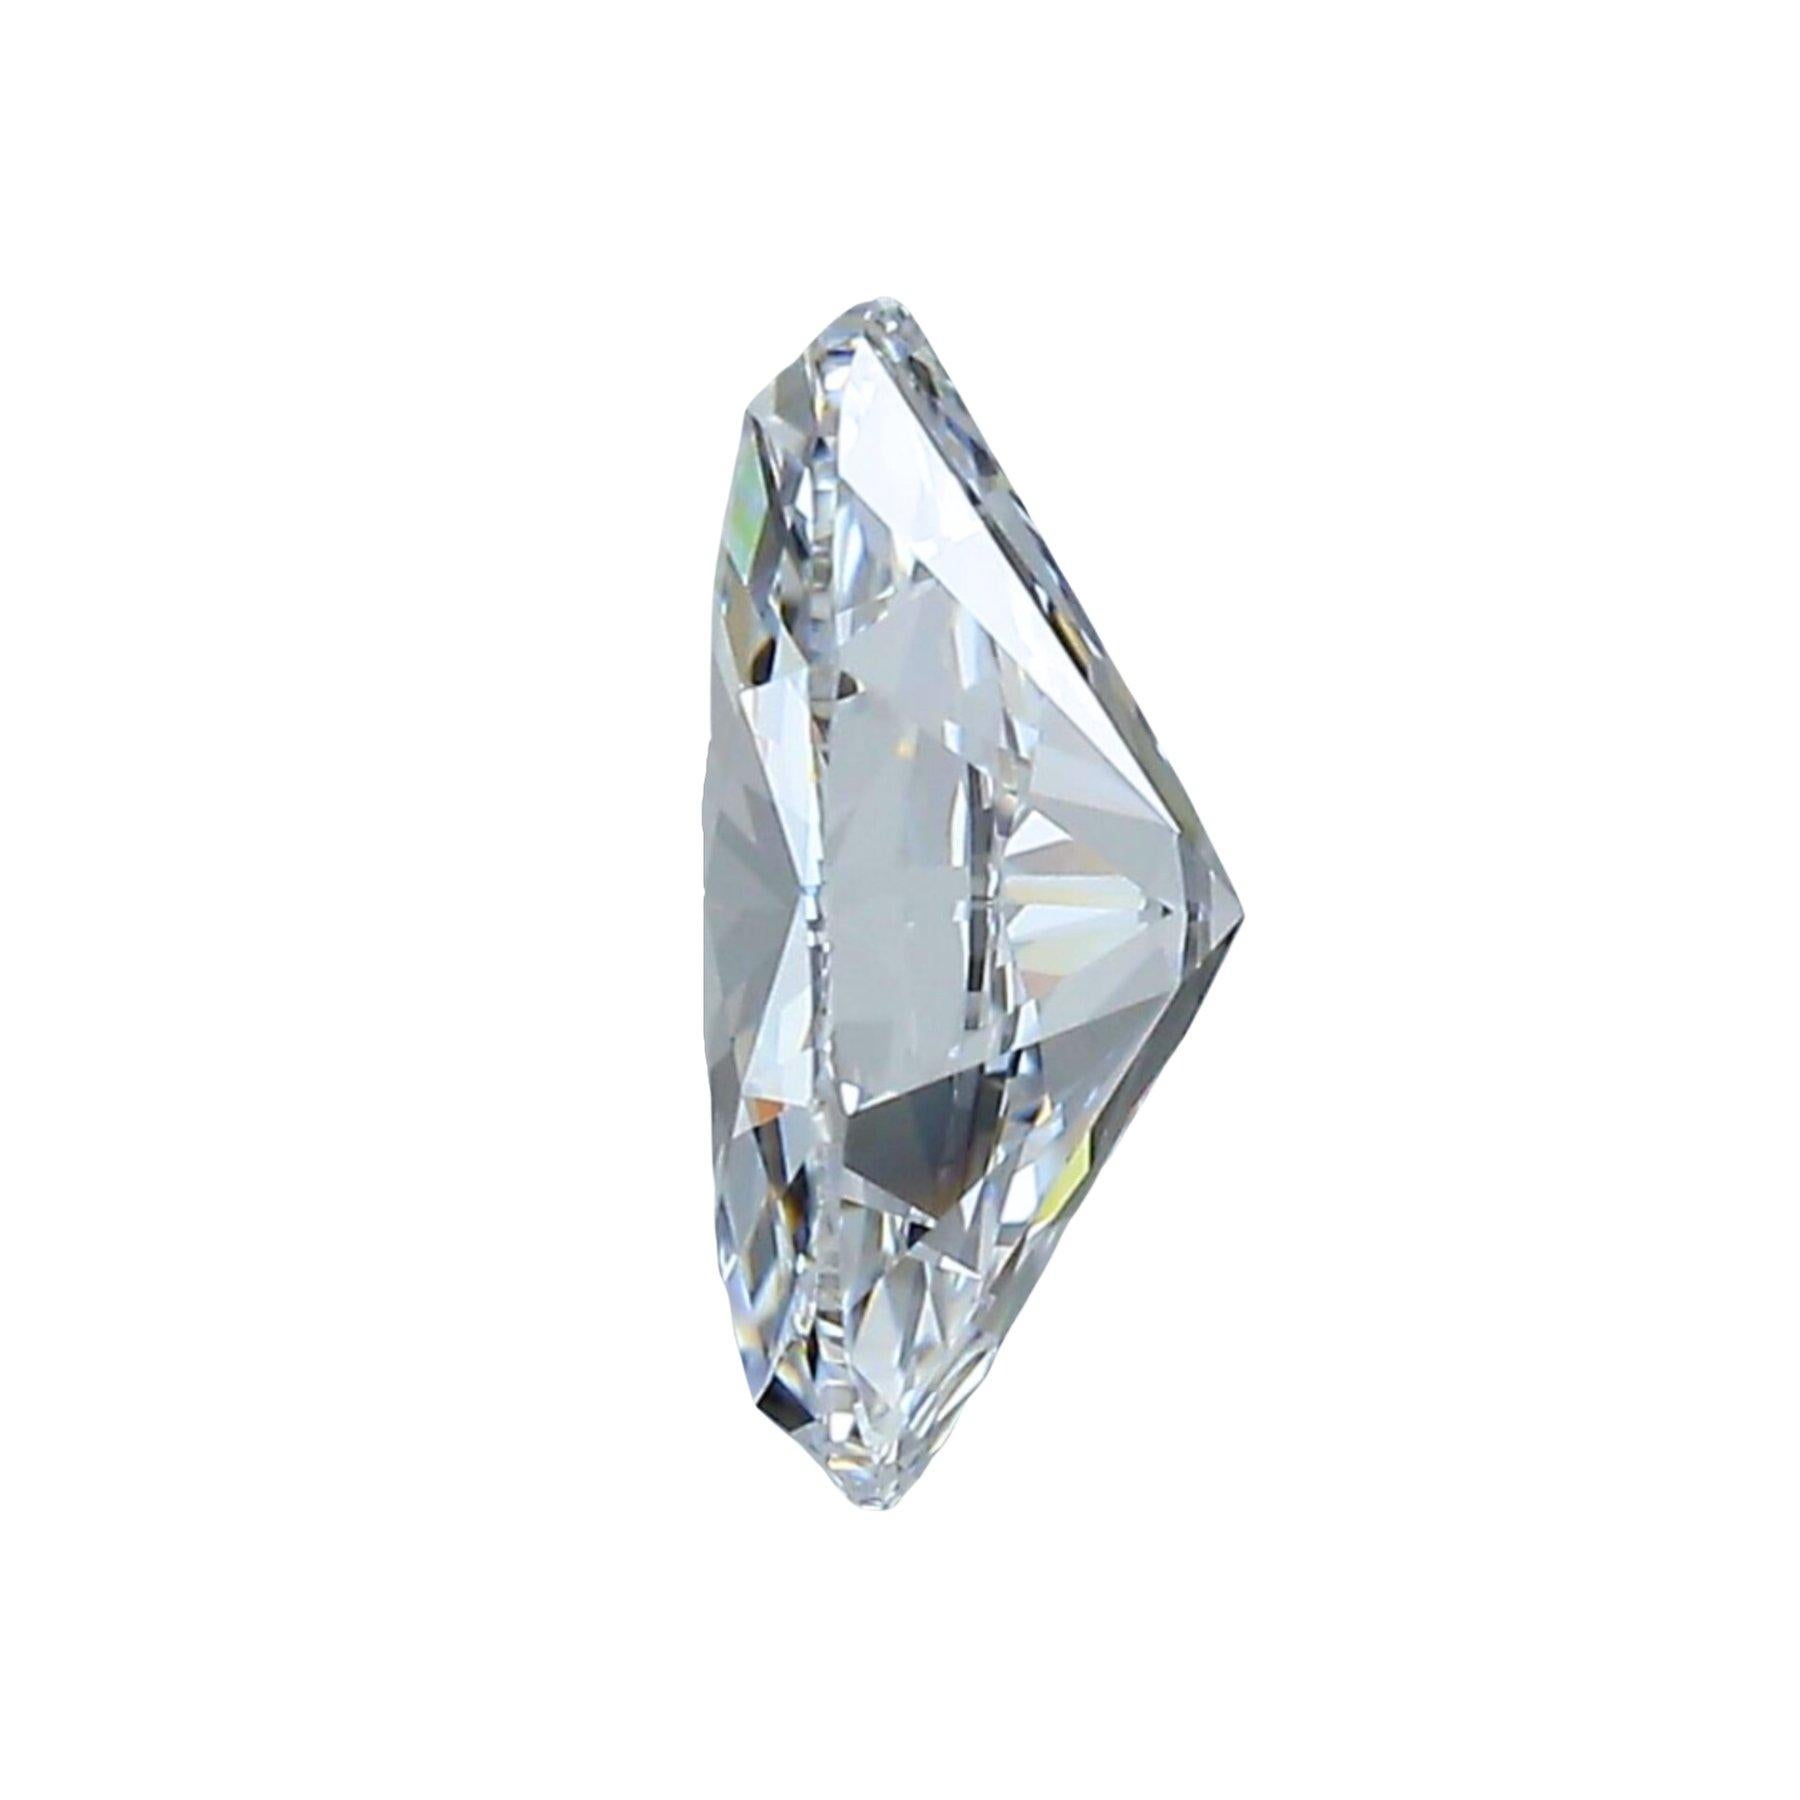 Oval Cut Magnificent 0.72 ct Ideal Cut Oval Diamond - GIA Certified